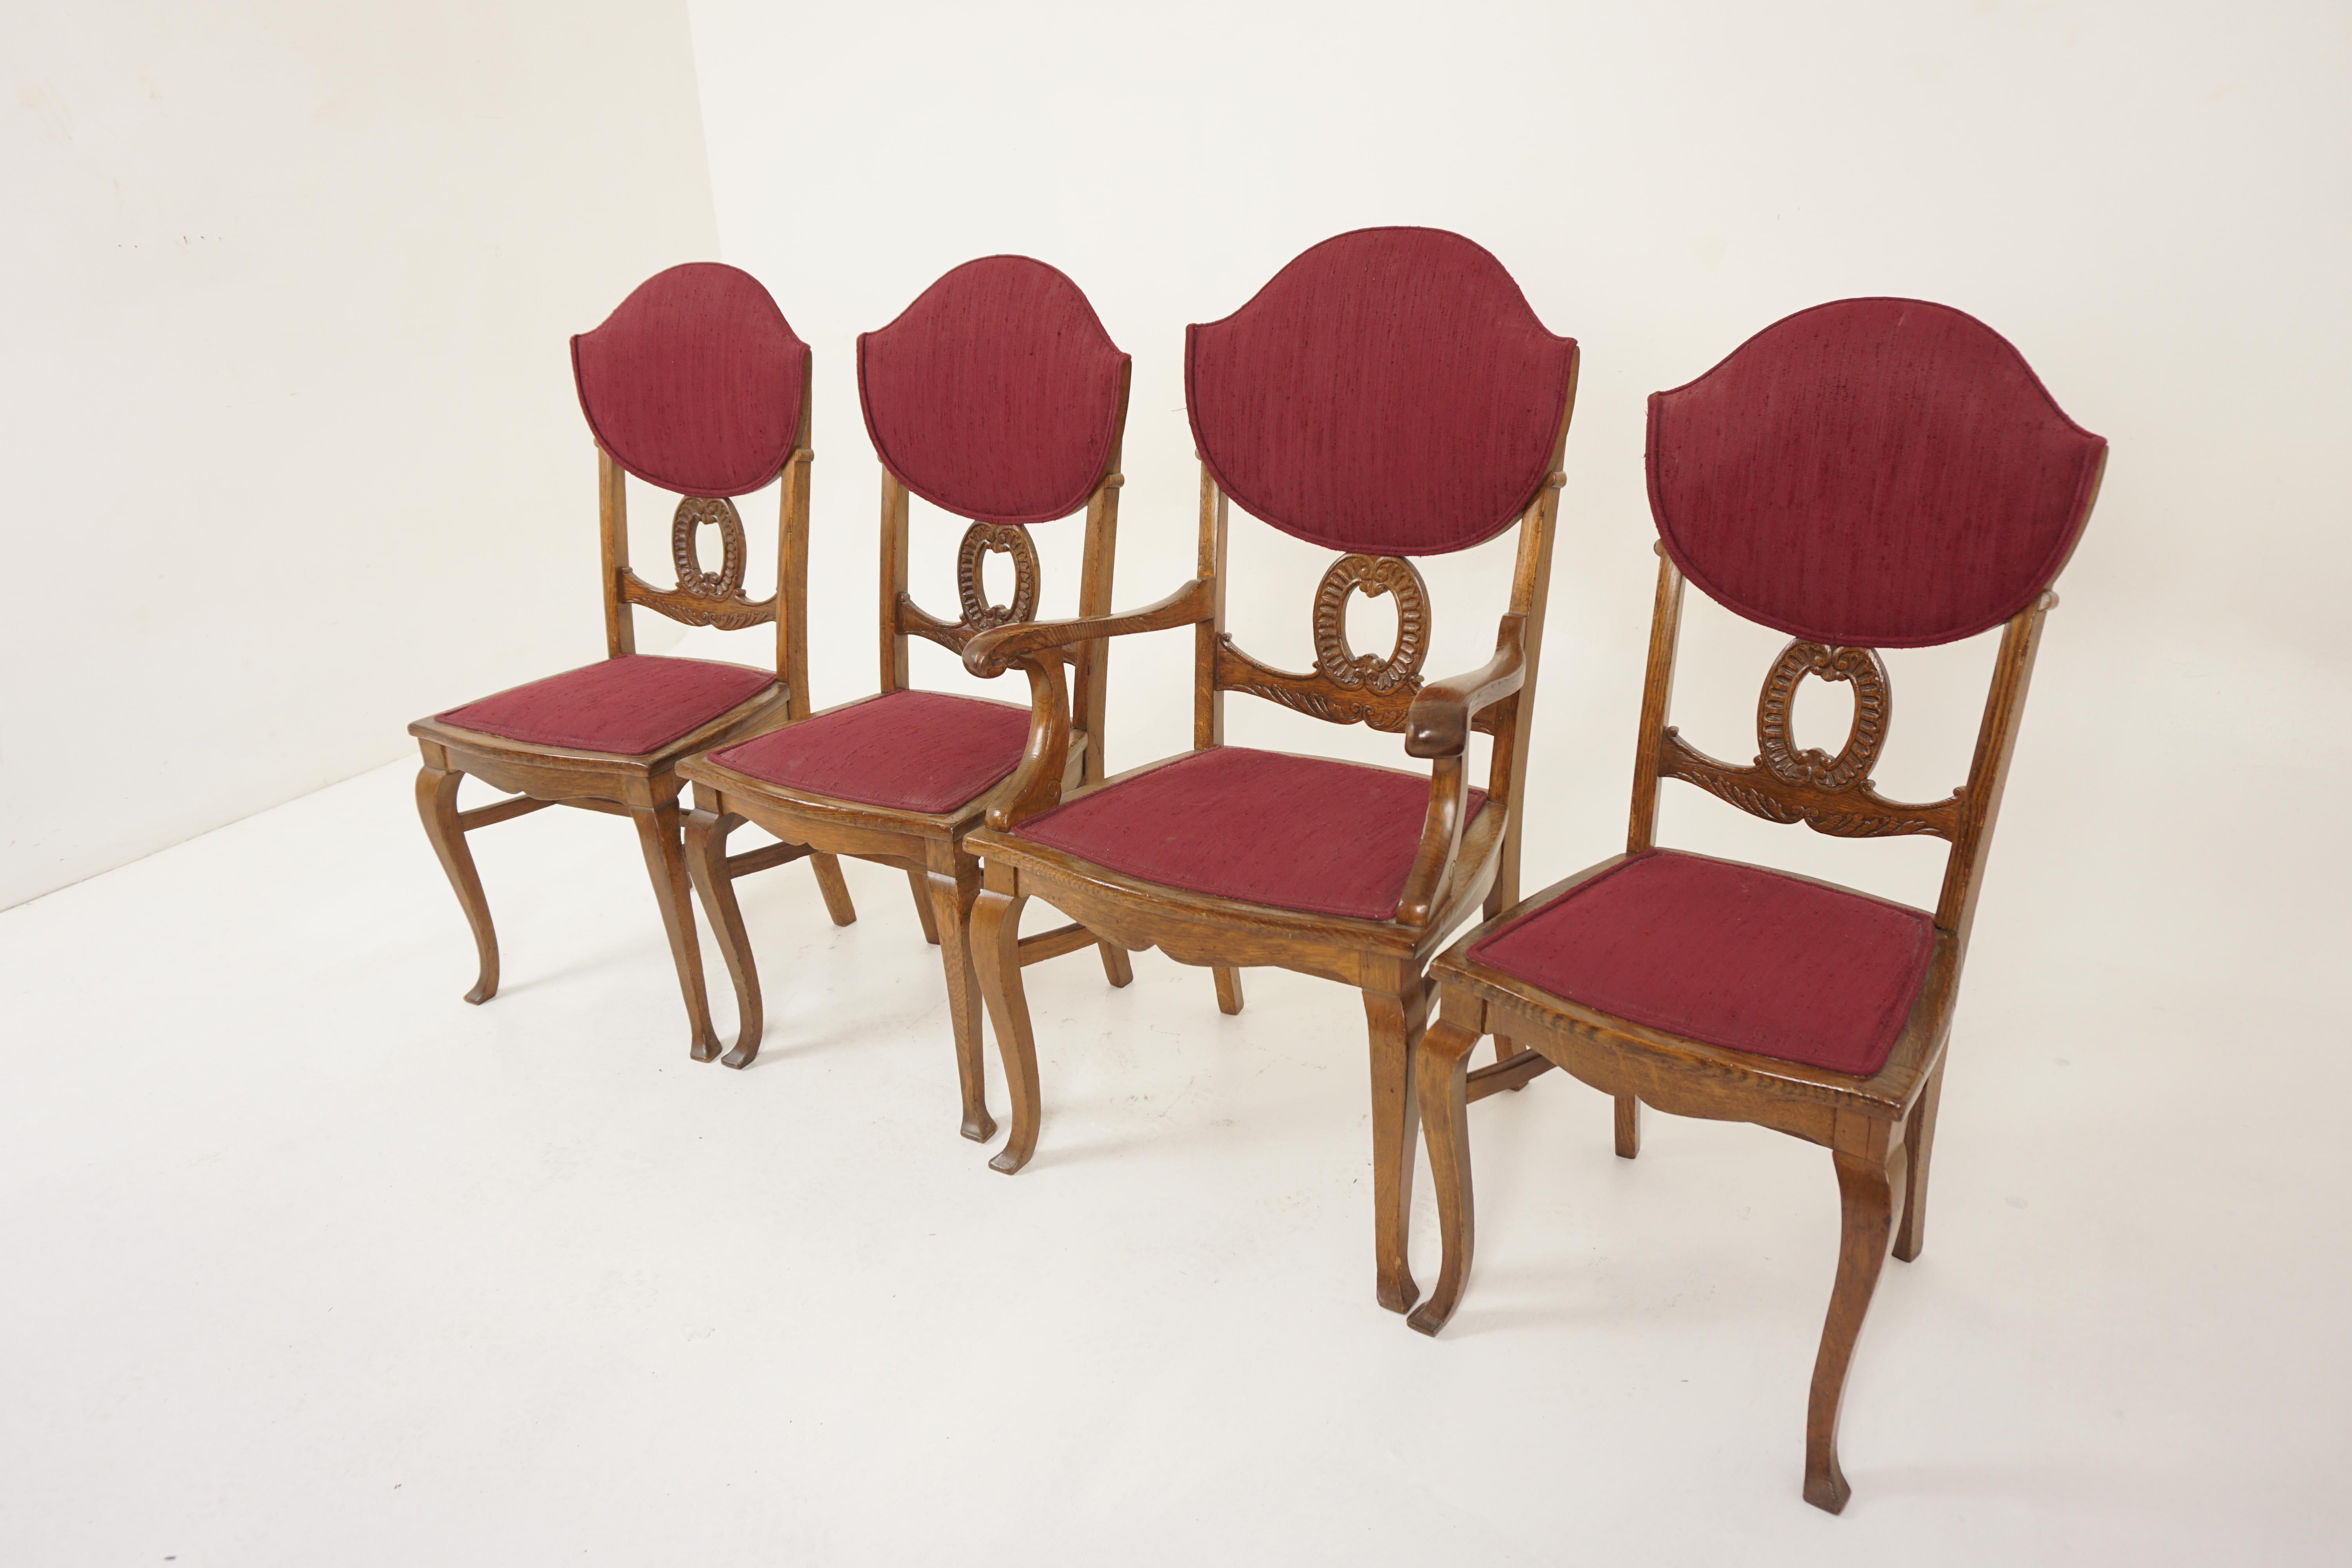 America 1910
Solid Tiger Oak
Original Finish
Upholstered shaped back
Carved center rail below
Upholstered seat
All standing on shaped legs with cross stretcher
Nice condition and solid robust chairs

H1198

Single chairs 18